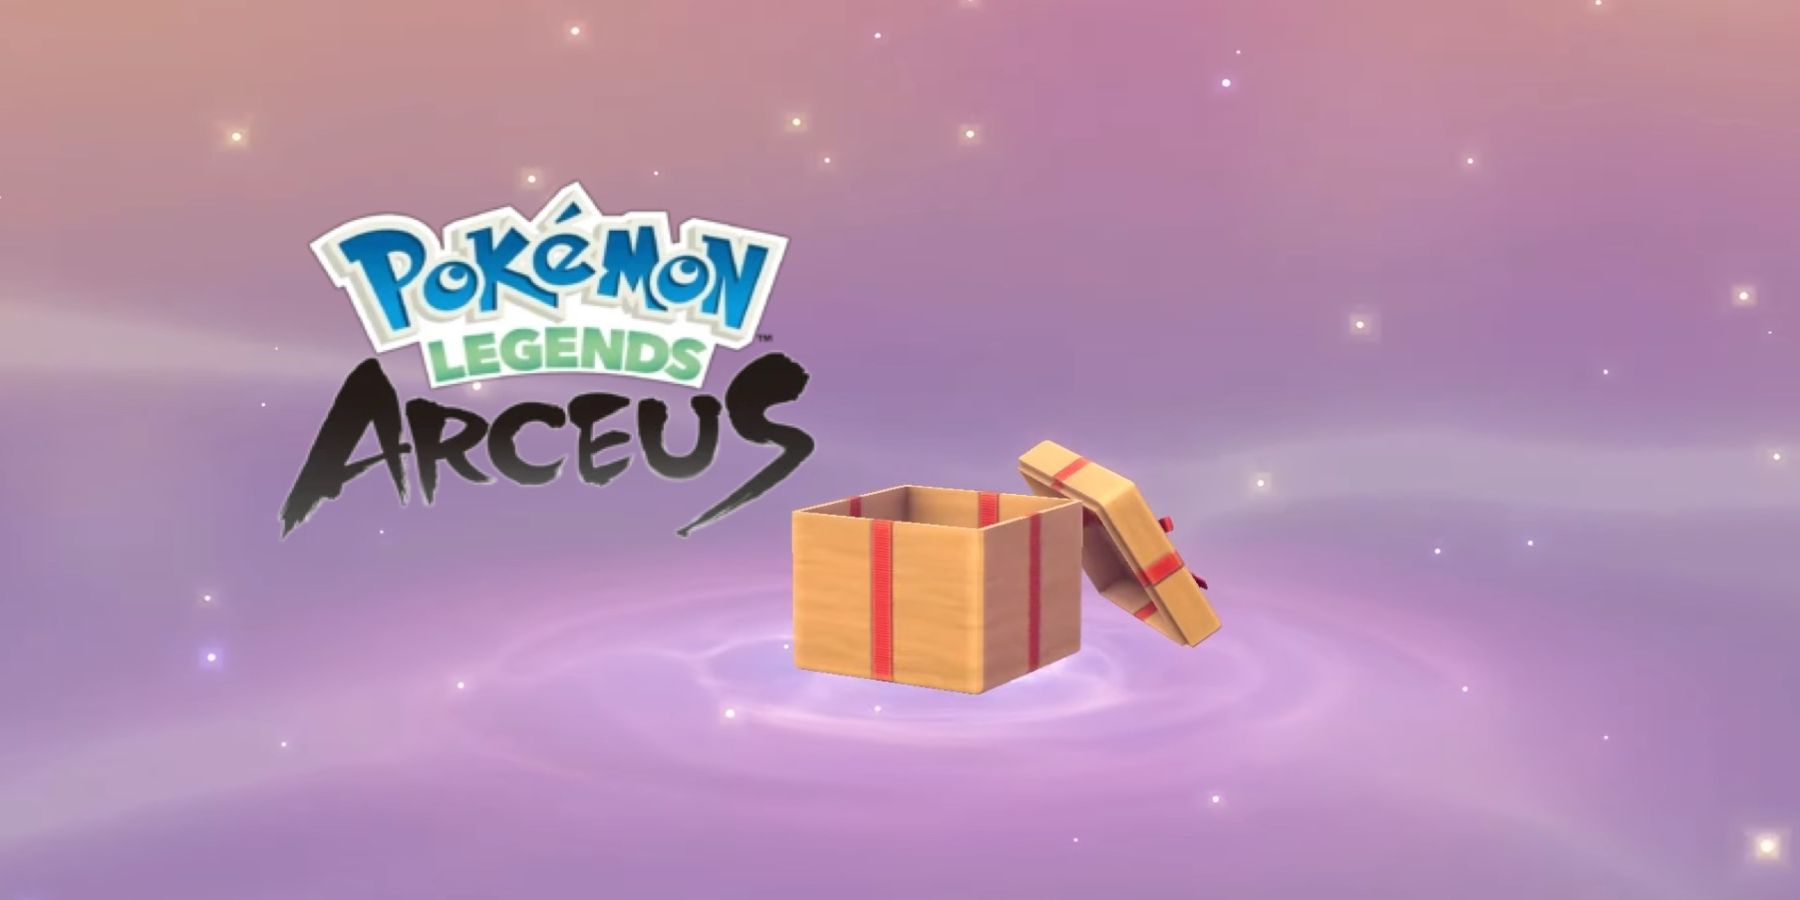 Pokémon Legends Arceus receives update 1.1.0. Check out all the new  features and gifts - Meristation